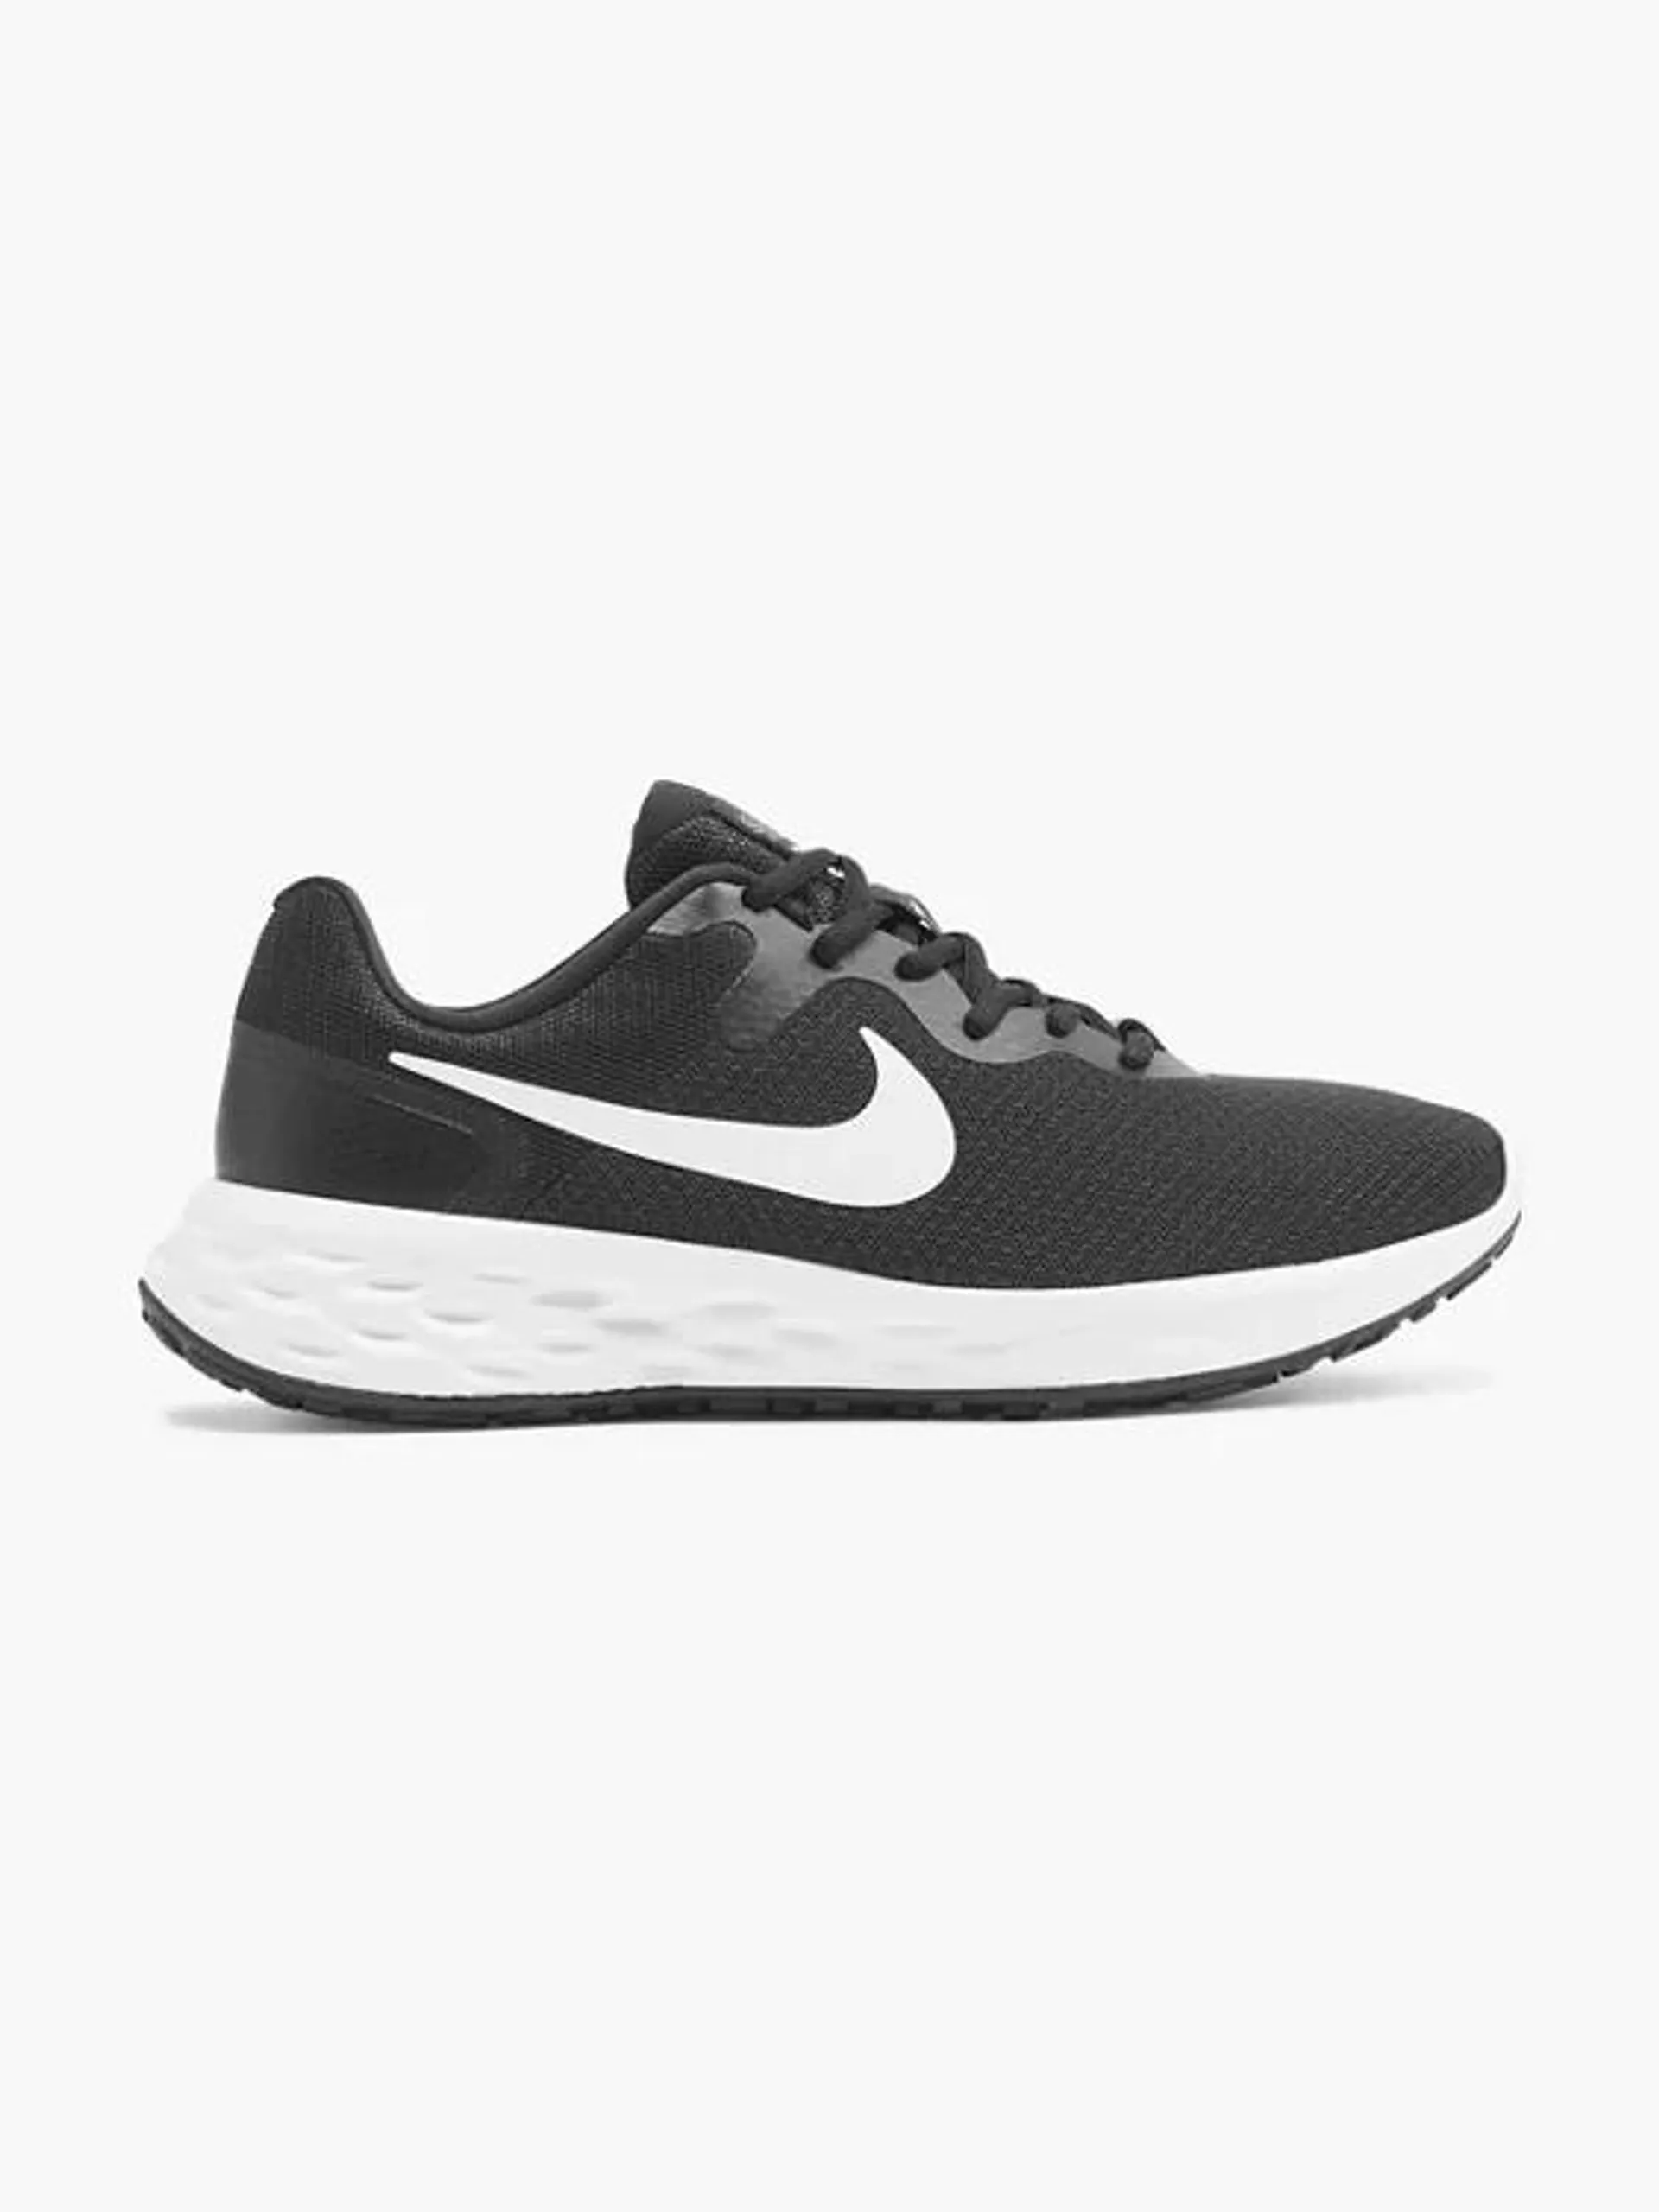 Mens Nike Revolution 6 Black Lace-up Trainers